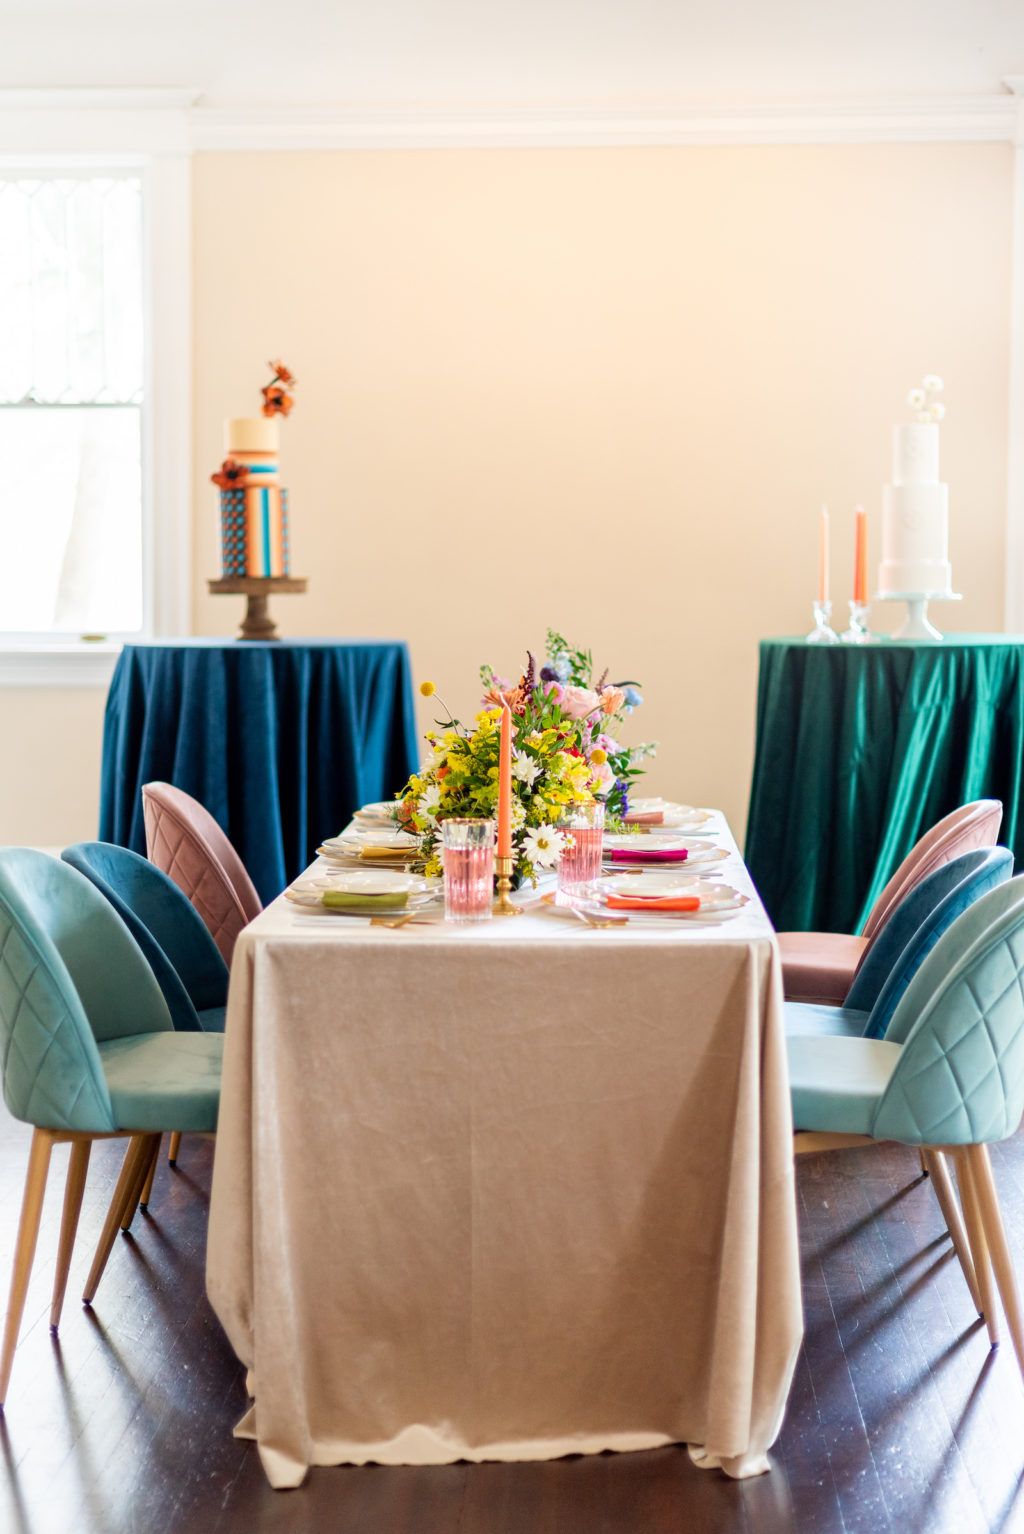 Tampa Wedding Styled Shoot 70's Retro Vintage | Velvet Chairs and Velvet Table Linen by Kate Ryan Event Rentals | Colorful Vibrant Wedding Centerpiece and Cakes